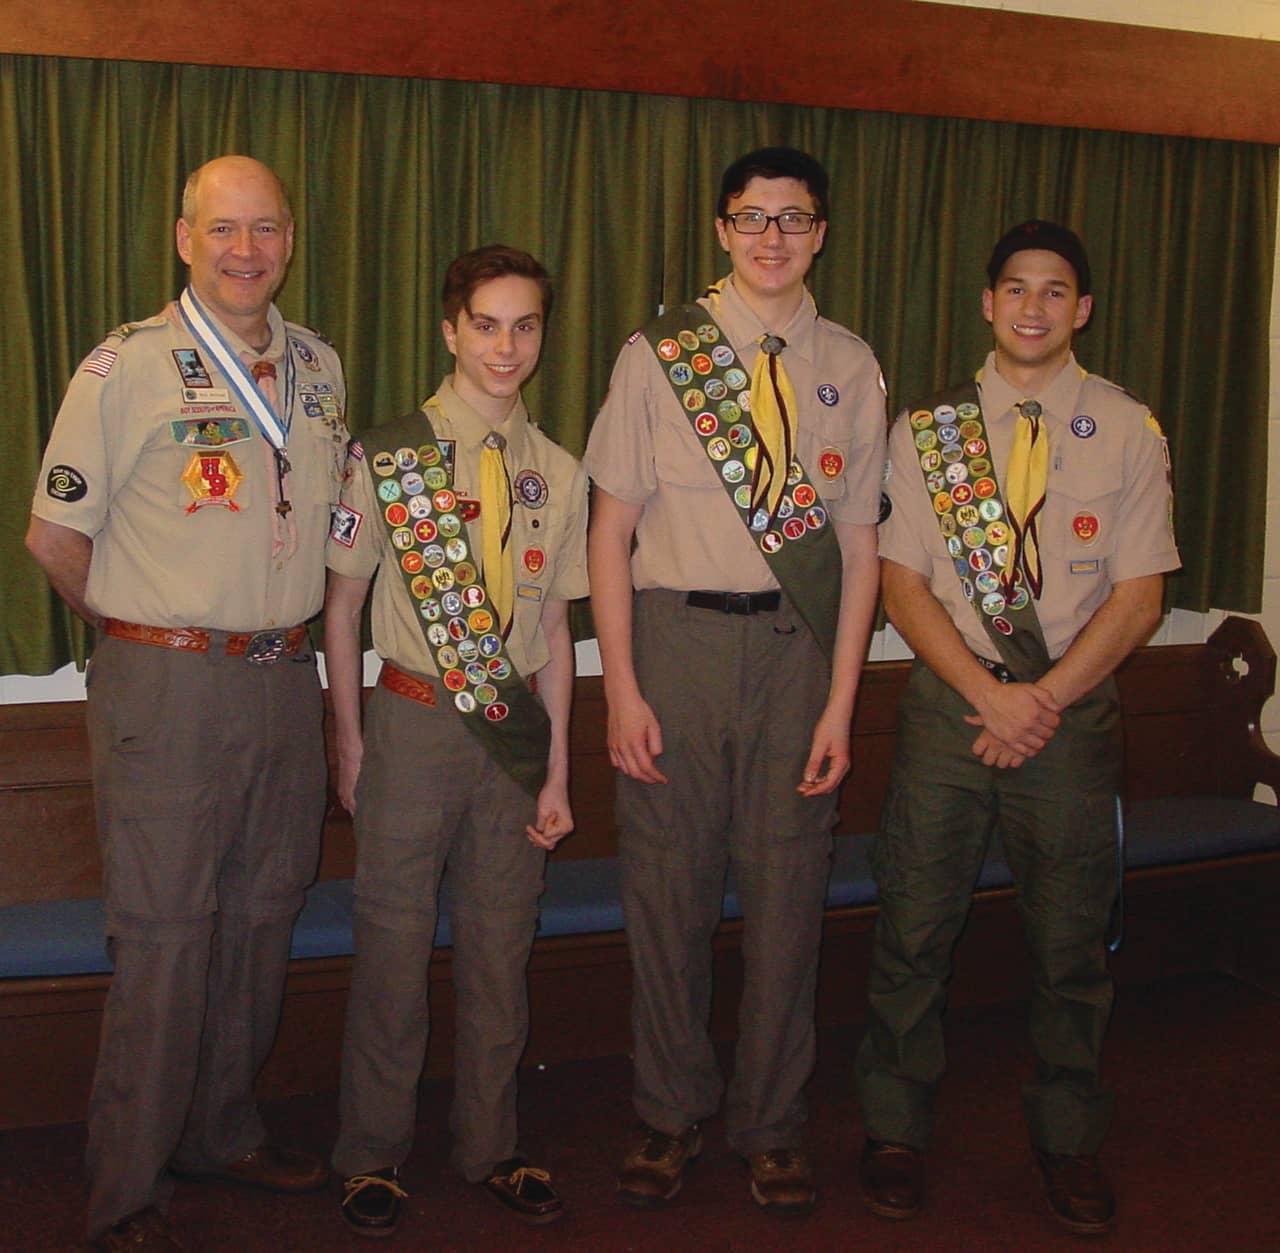 Troop 154's fall Court of Honor recognized Matt Salton, Matthew Galea, and Dunlin Stathis for their hard work and time commitment in earning the rank of Eagle Scout.